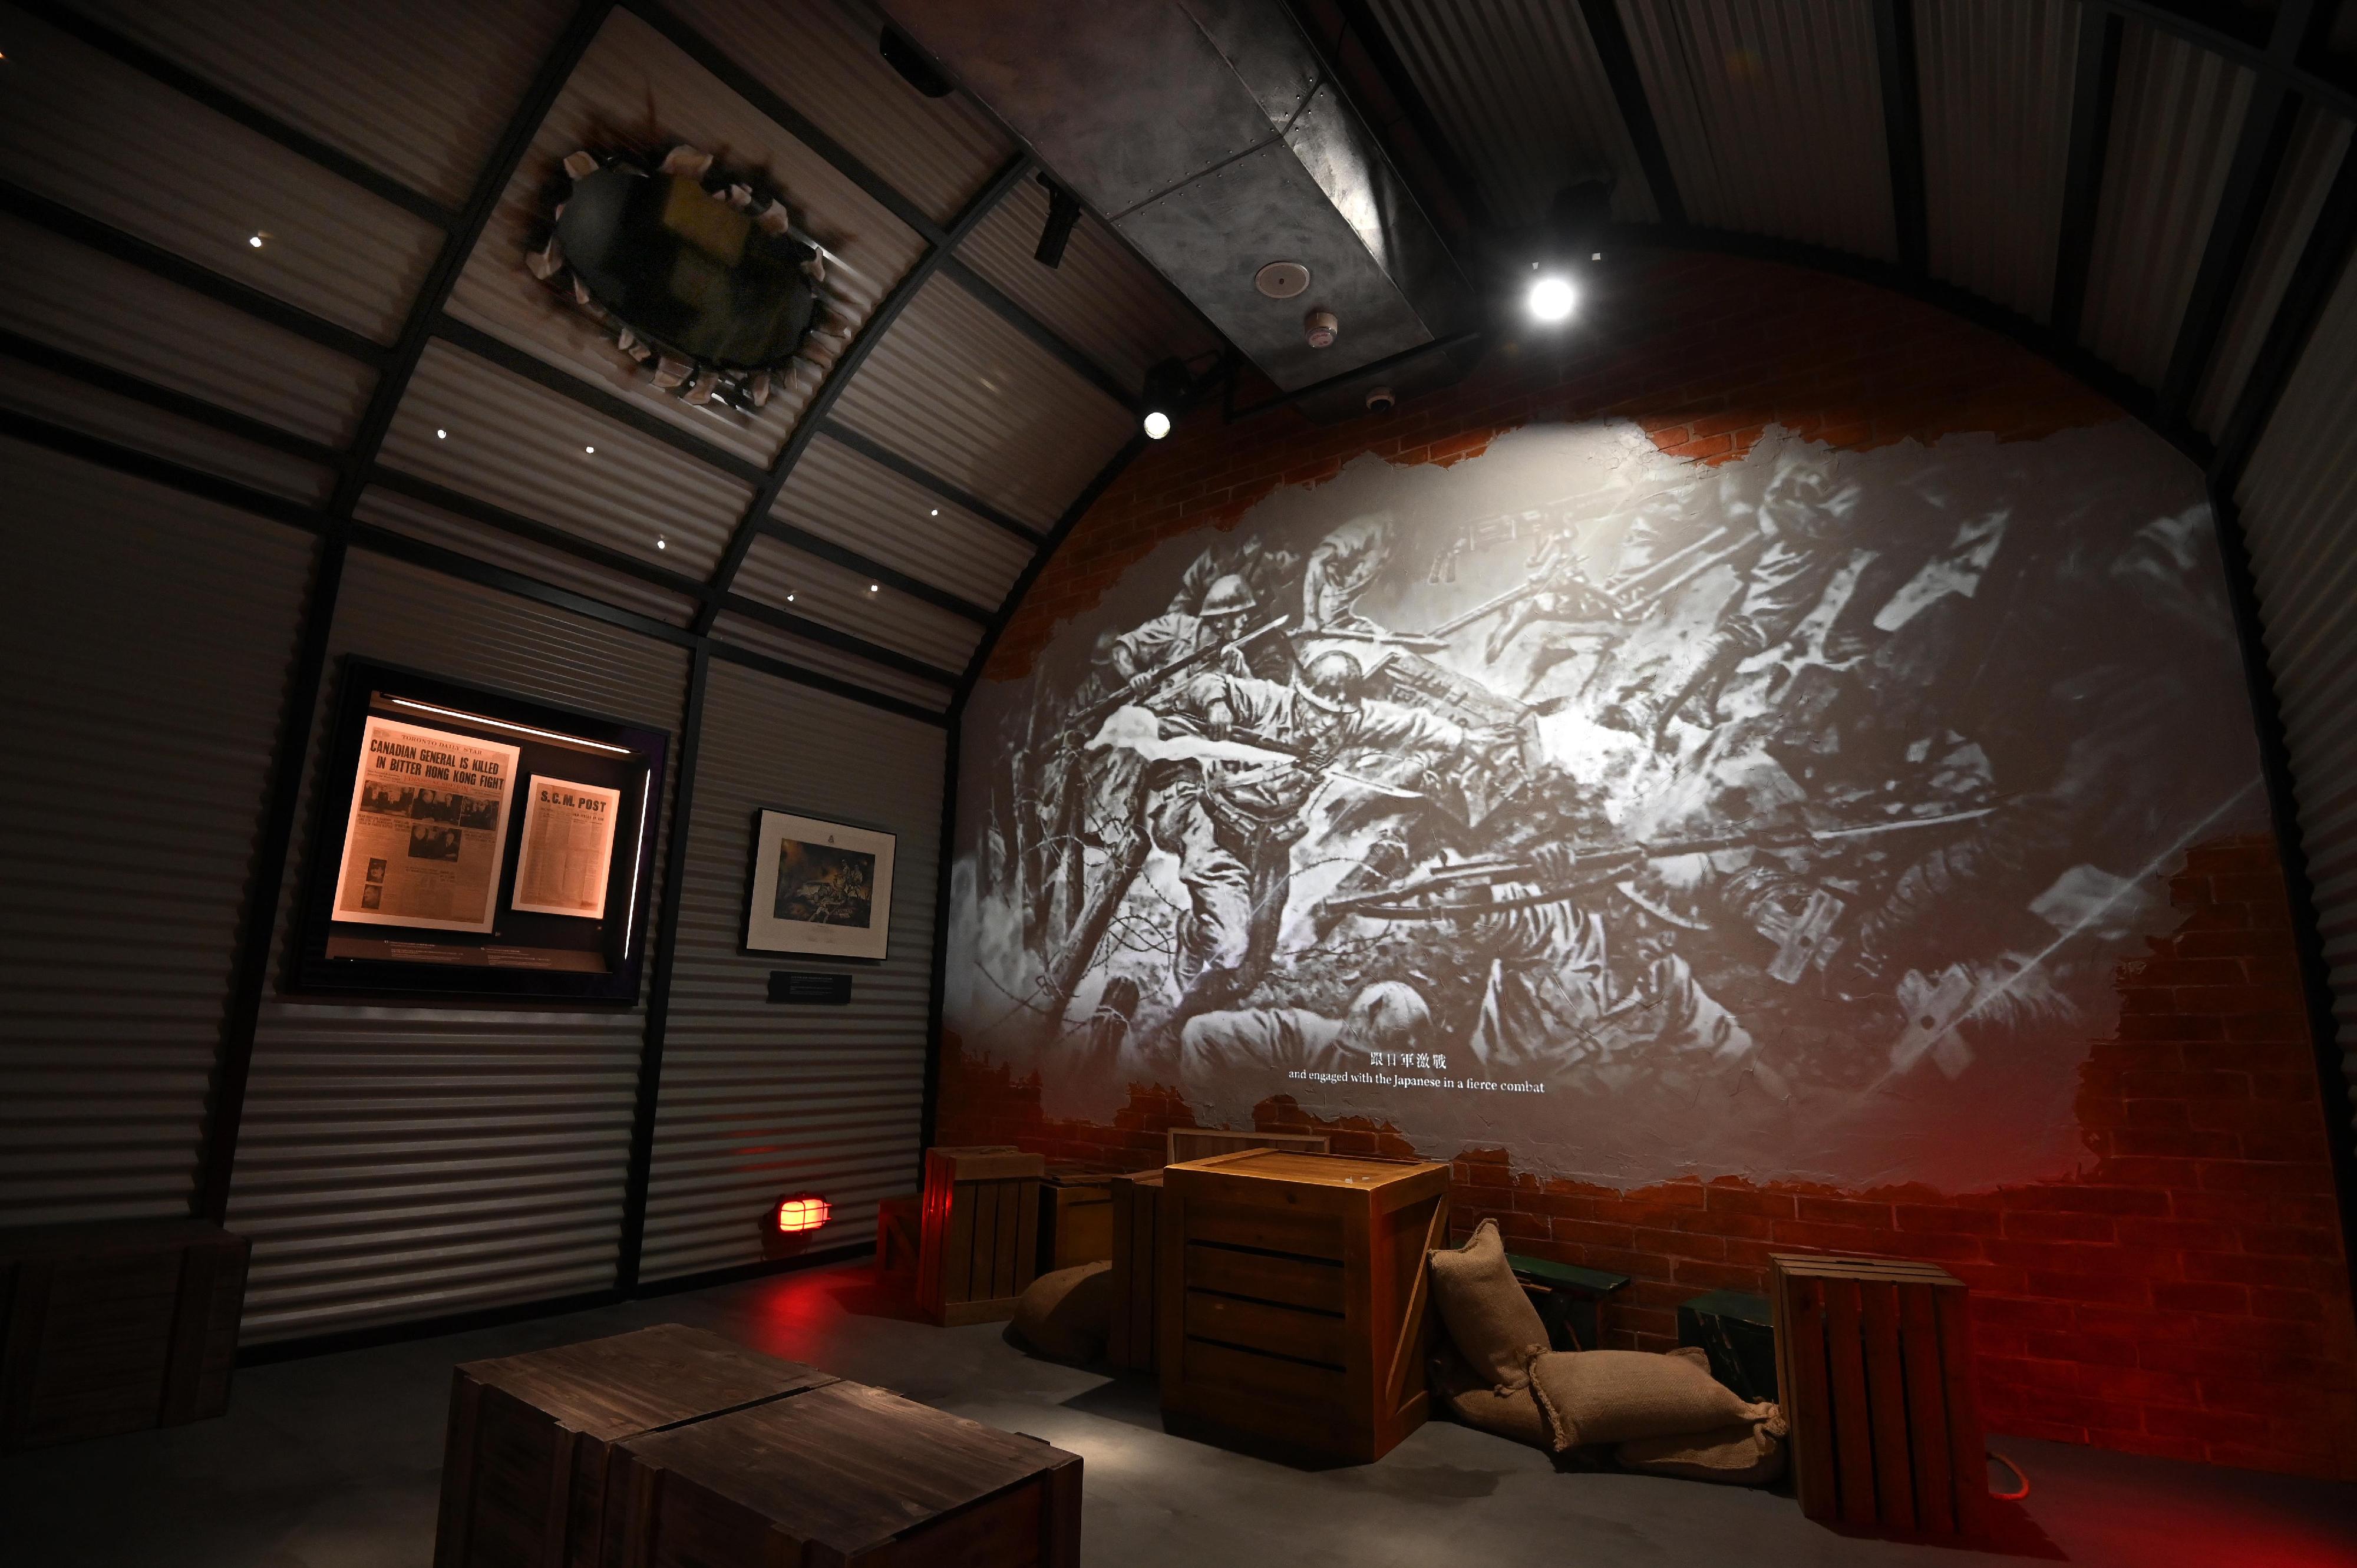 The Hong Kong Museum of Coastal Defence will reopen to the public from tomorrow (November 24) and bring forward a new permanent exhibition, "The Story of Hong Kong Coastal Defence". Picture shows immersive videos in the "Japanese Invasion of Hong Kong" gallery, enabling visitors to feel the intense situation of the Battle of Hong Kong.